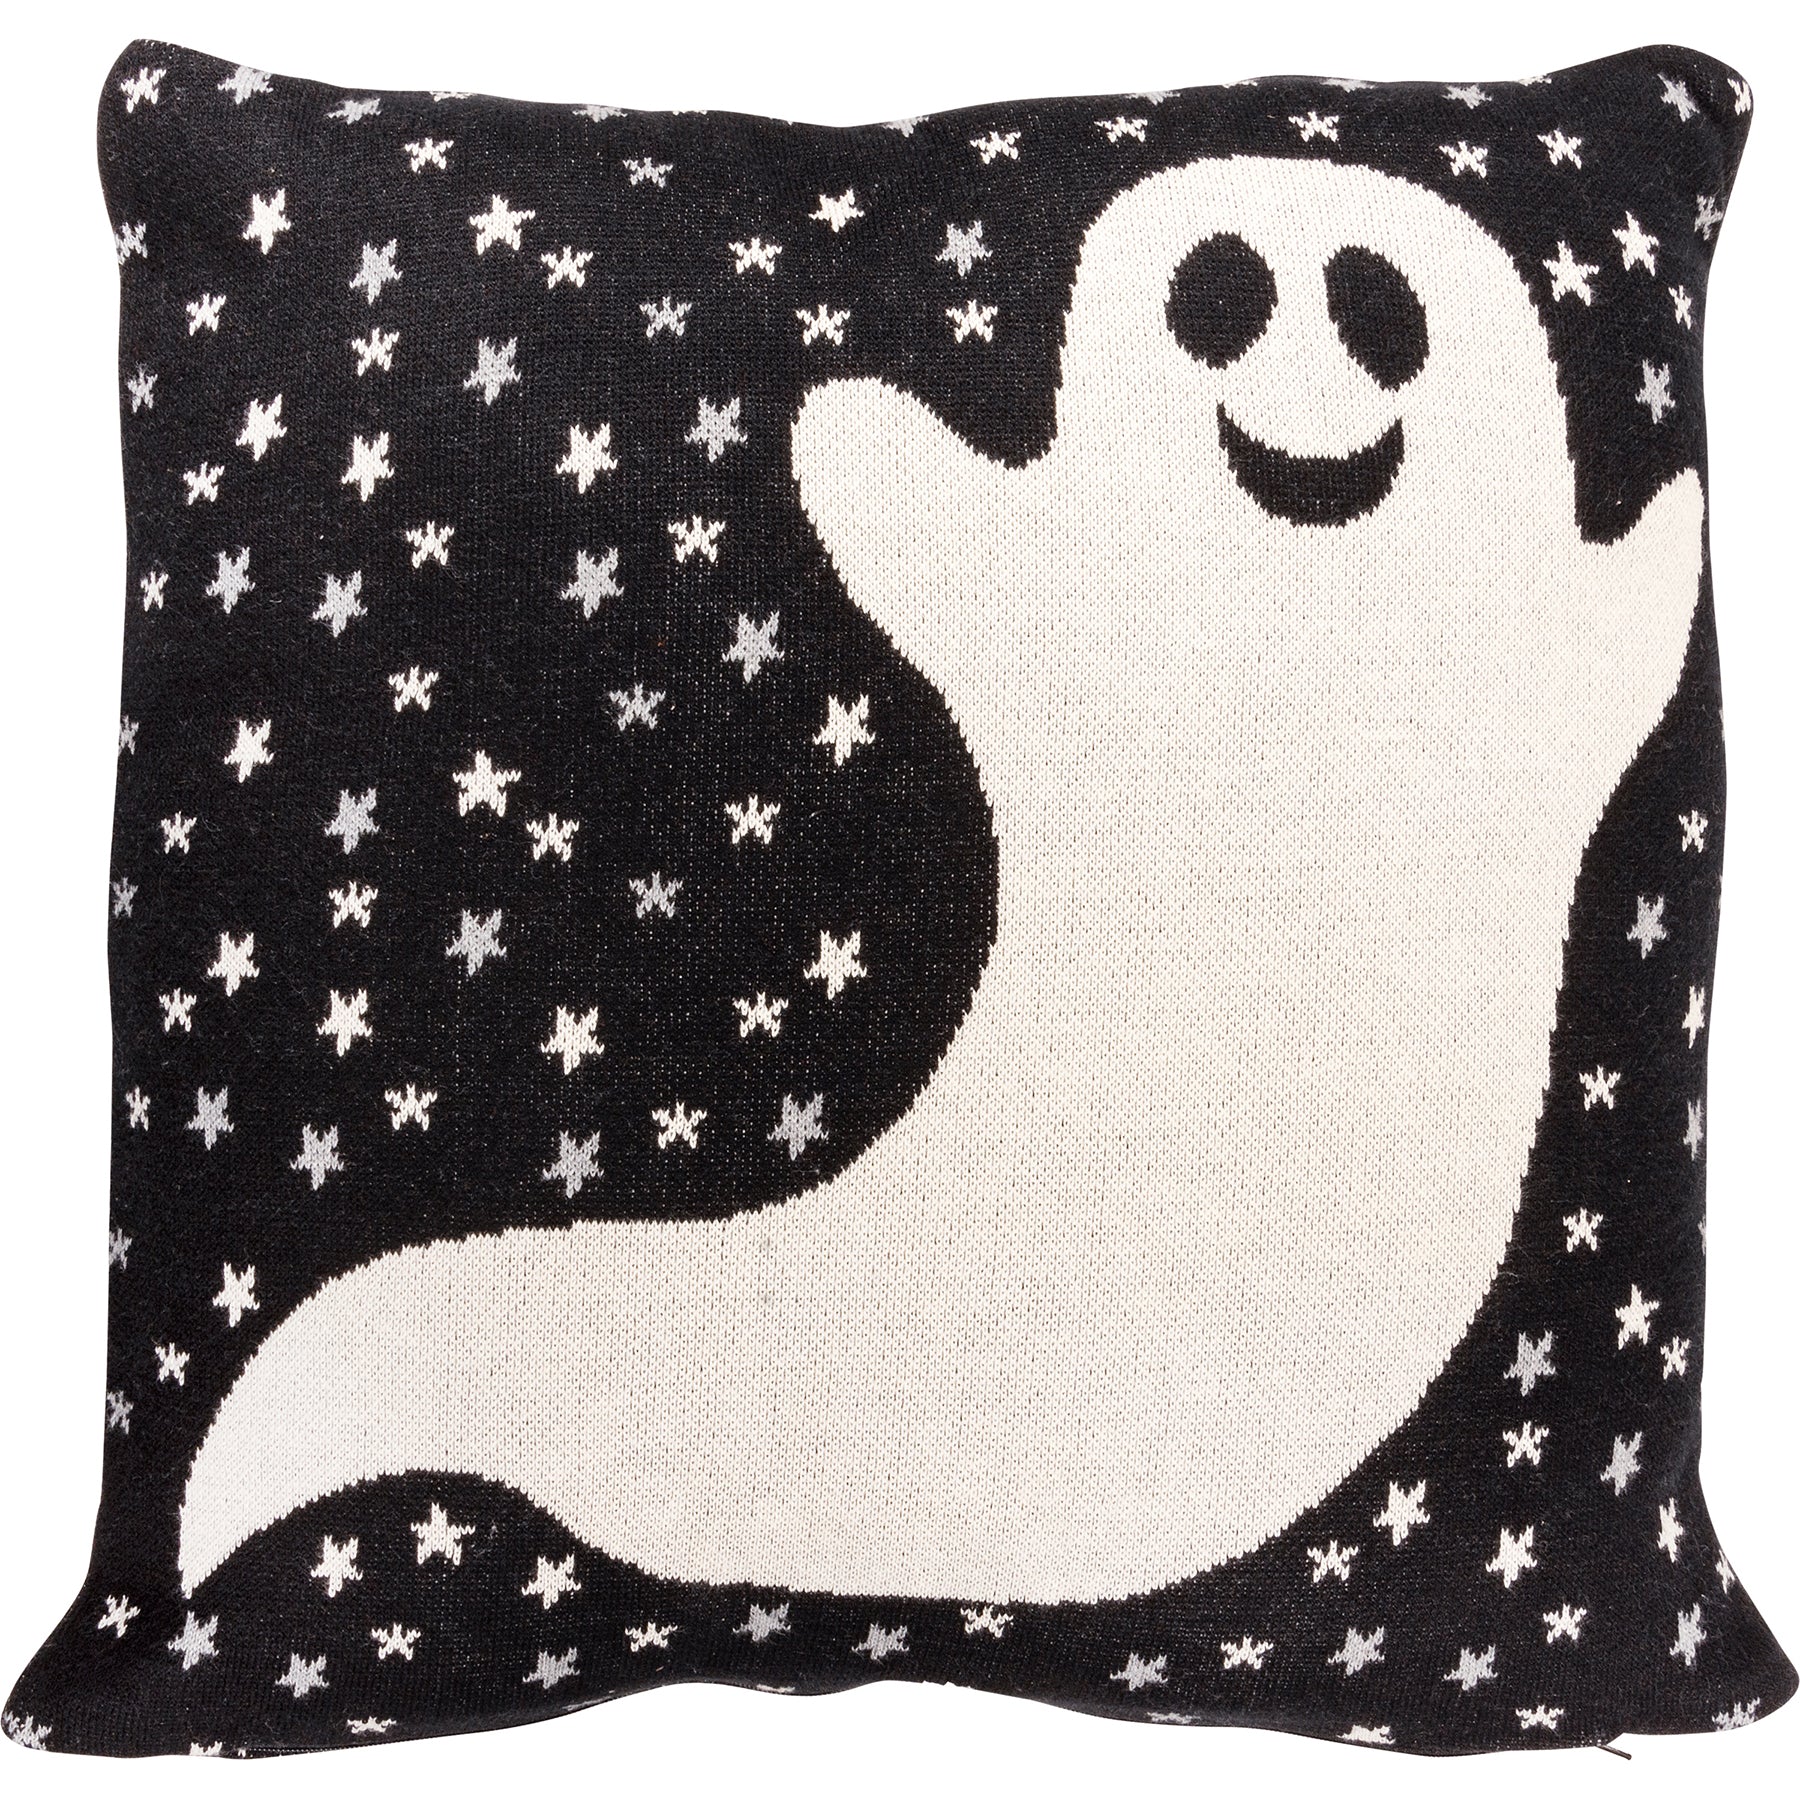 Whimsy Ghost Pillow